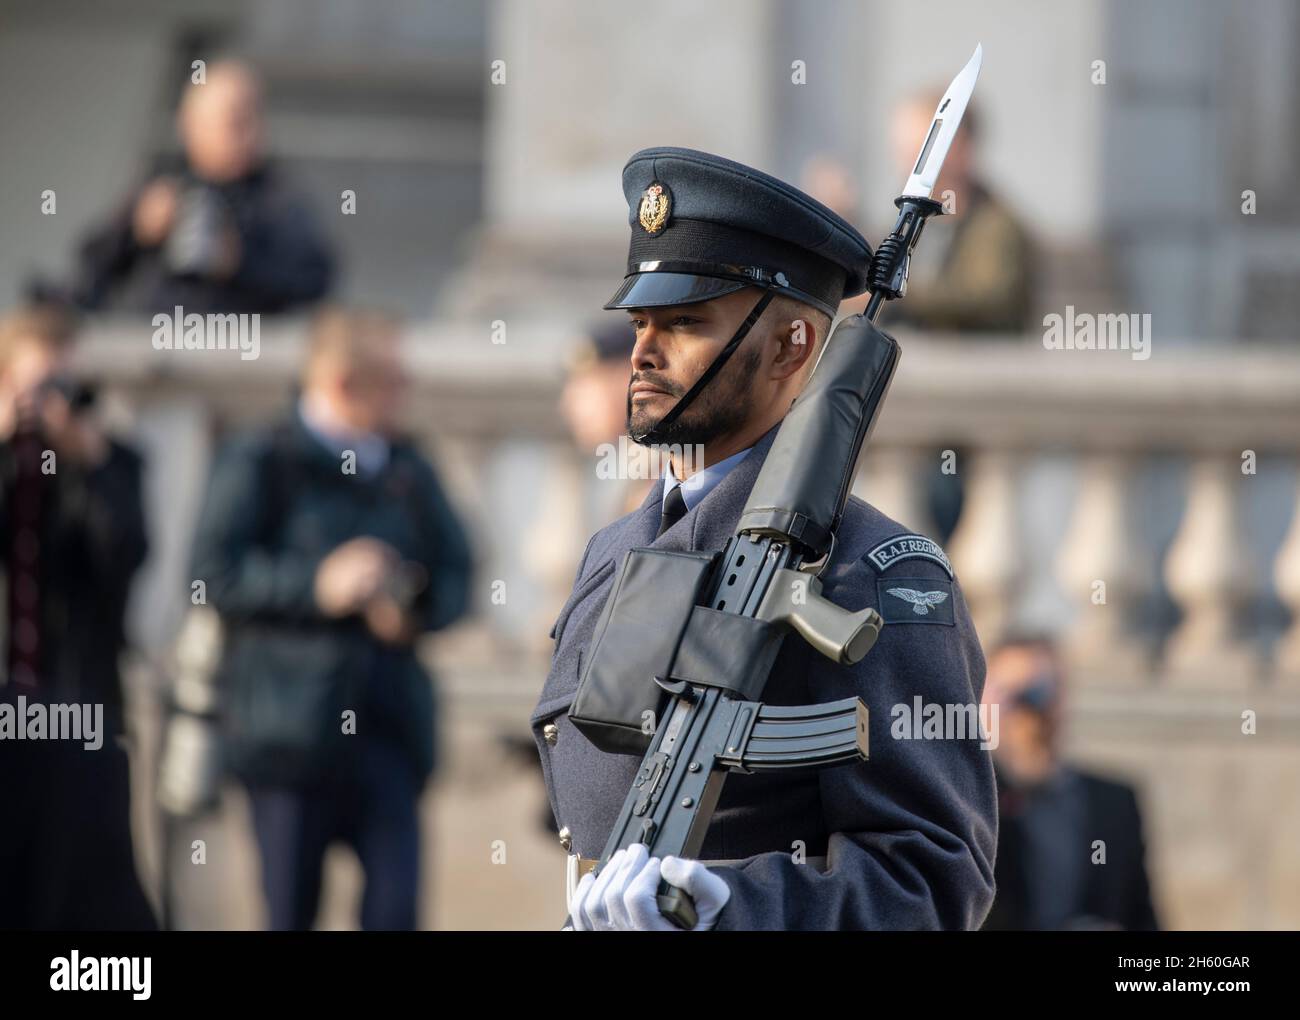 London, UK. The Western Front Association Annual Service of Remembrance takes place at The Cenotaph in Whitehall on 11 November 2021, attracting large crowds who come to pay their respects on a sunny Autumn day. A member of the RAF Regiment Vigil Party stands at the south west corner of The Cenotaph. Credit: Malcolm Park/Alamy Stock Photo